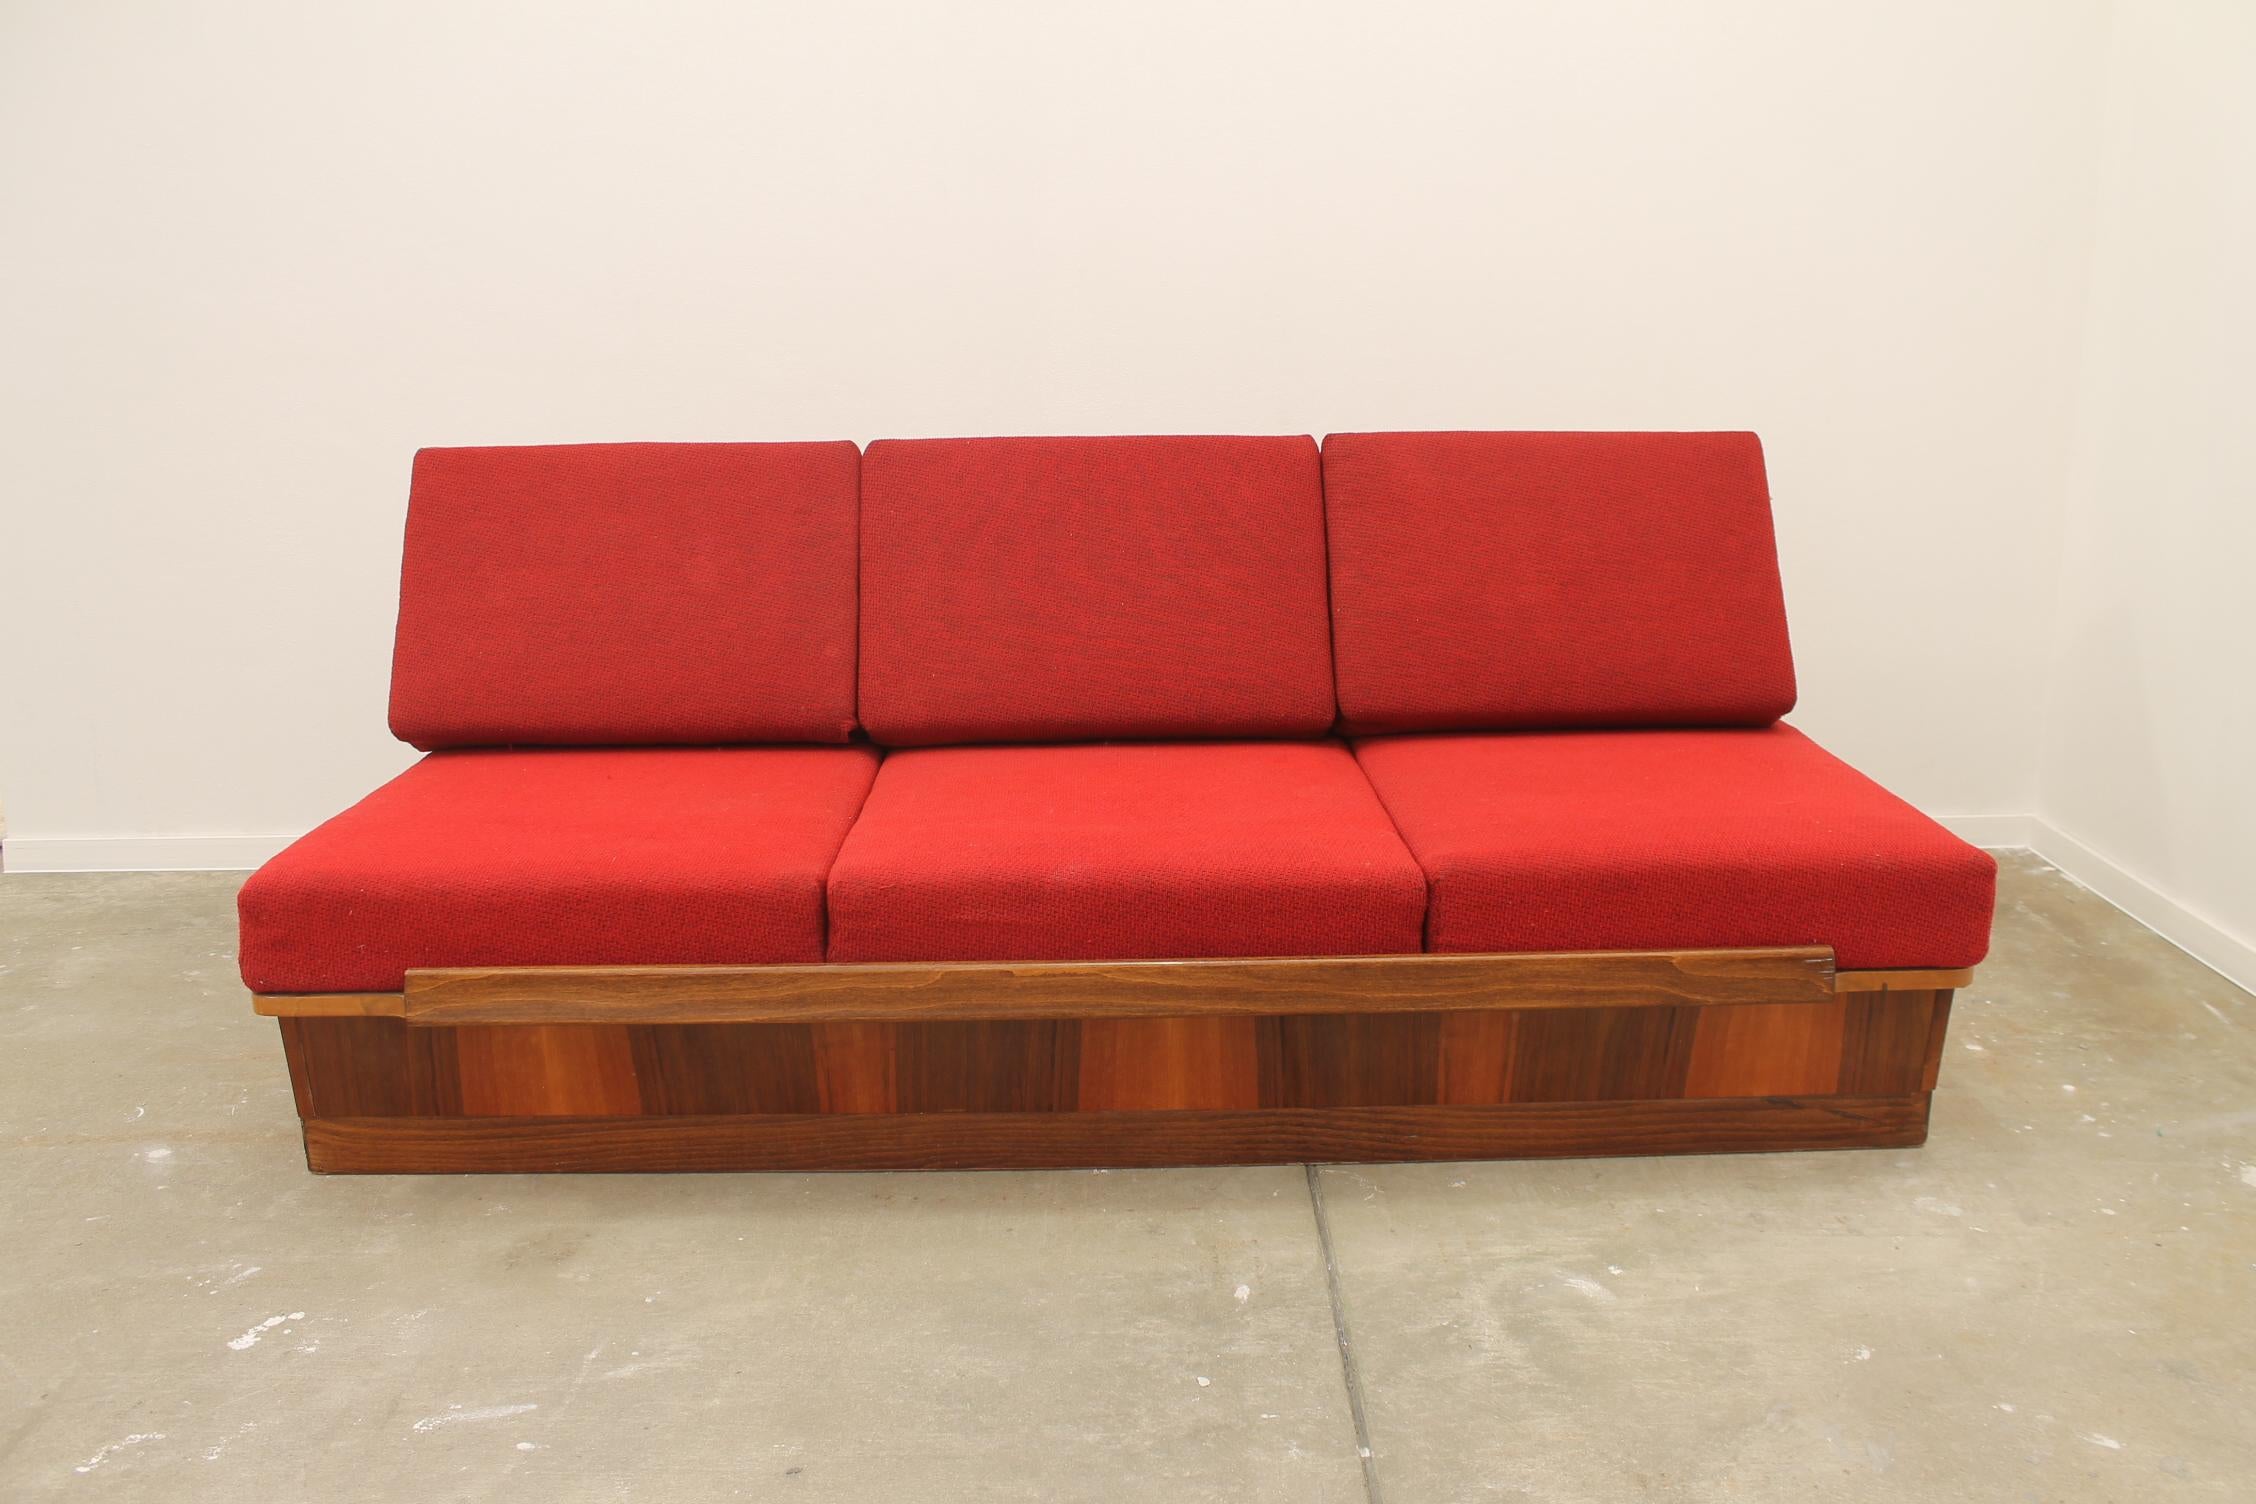 Midcentury folding sofabed, made by Mier company in the former Czechoslovakia in the 1960s. This sofa features a wooden structure that is veneered in walnut. The sofa is in very good vintage condition, showing slight signs of age and using.